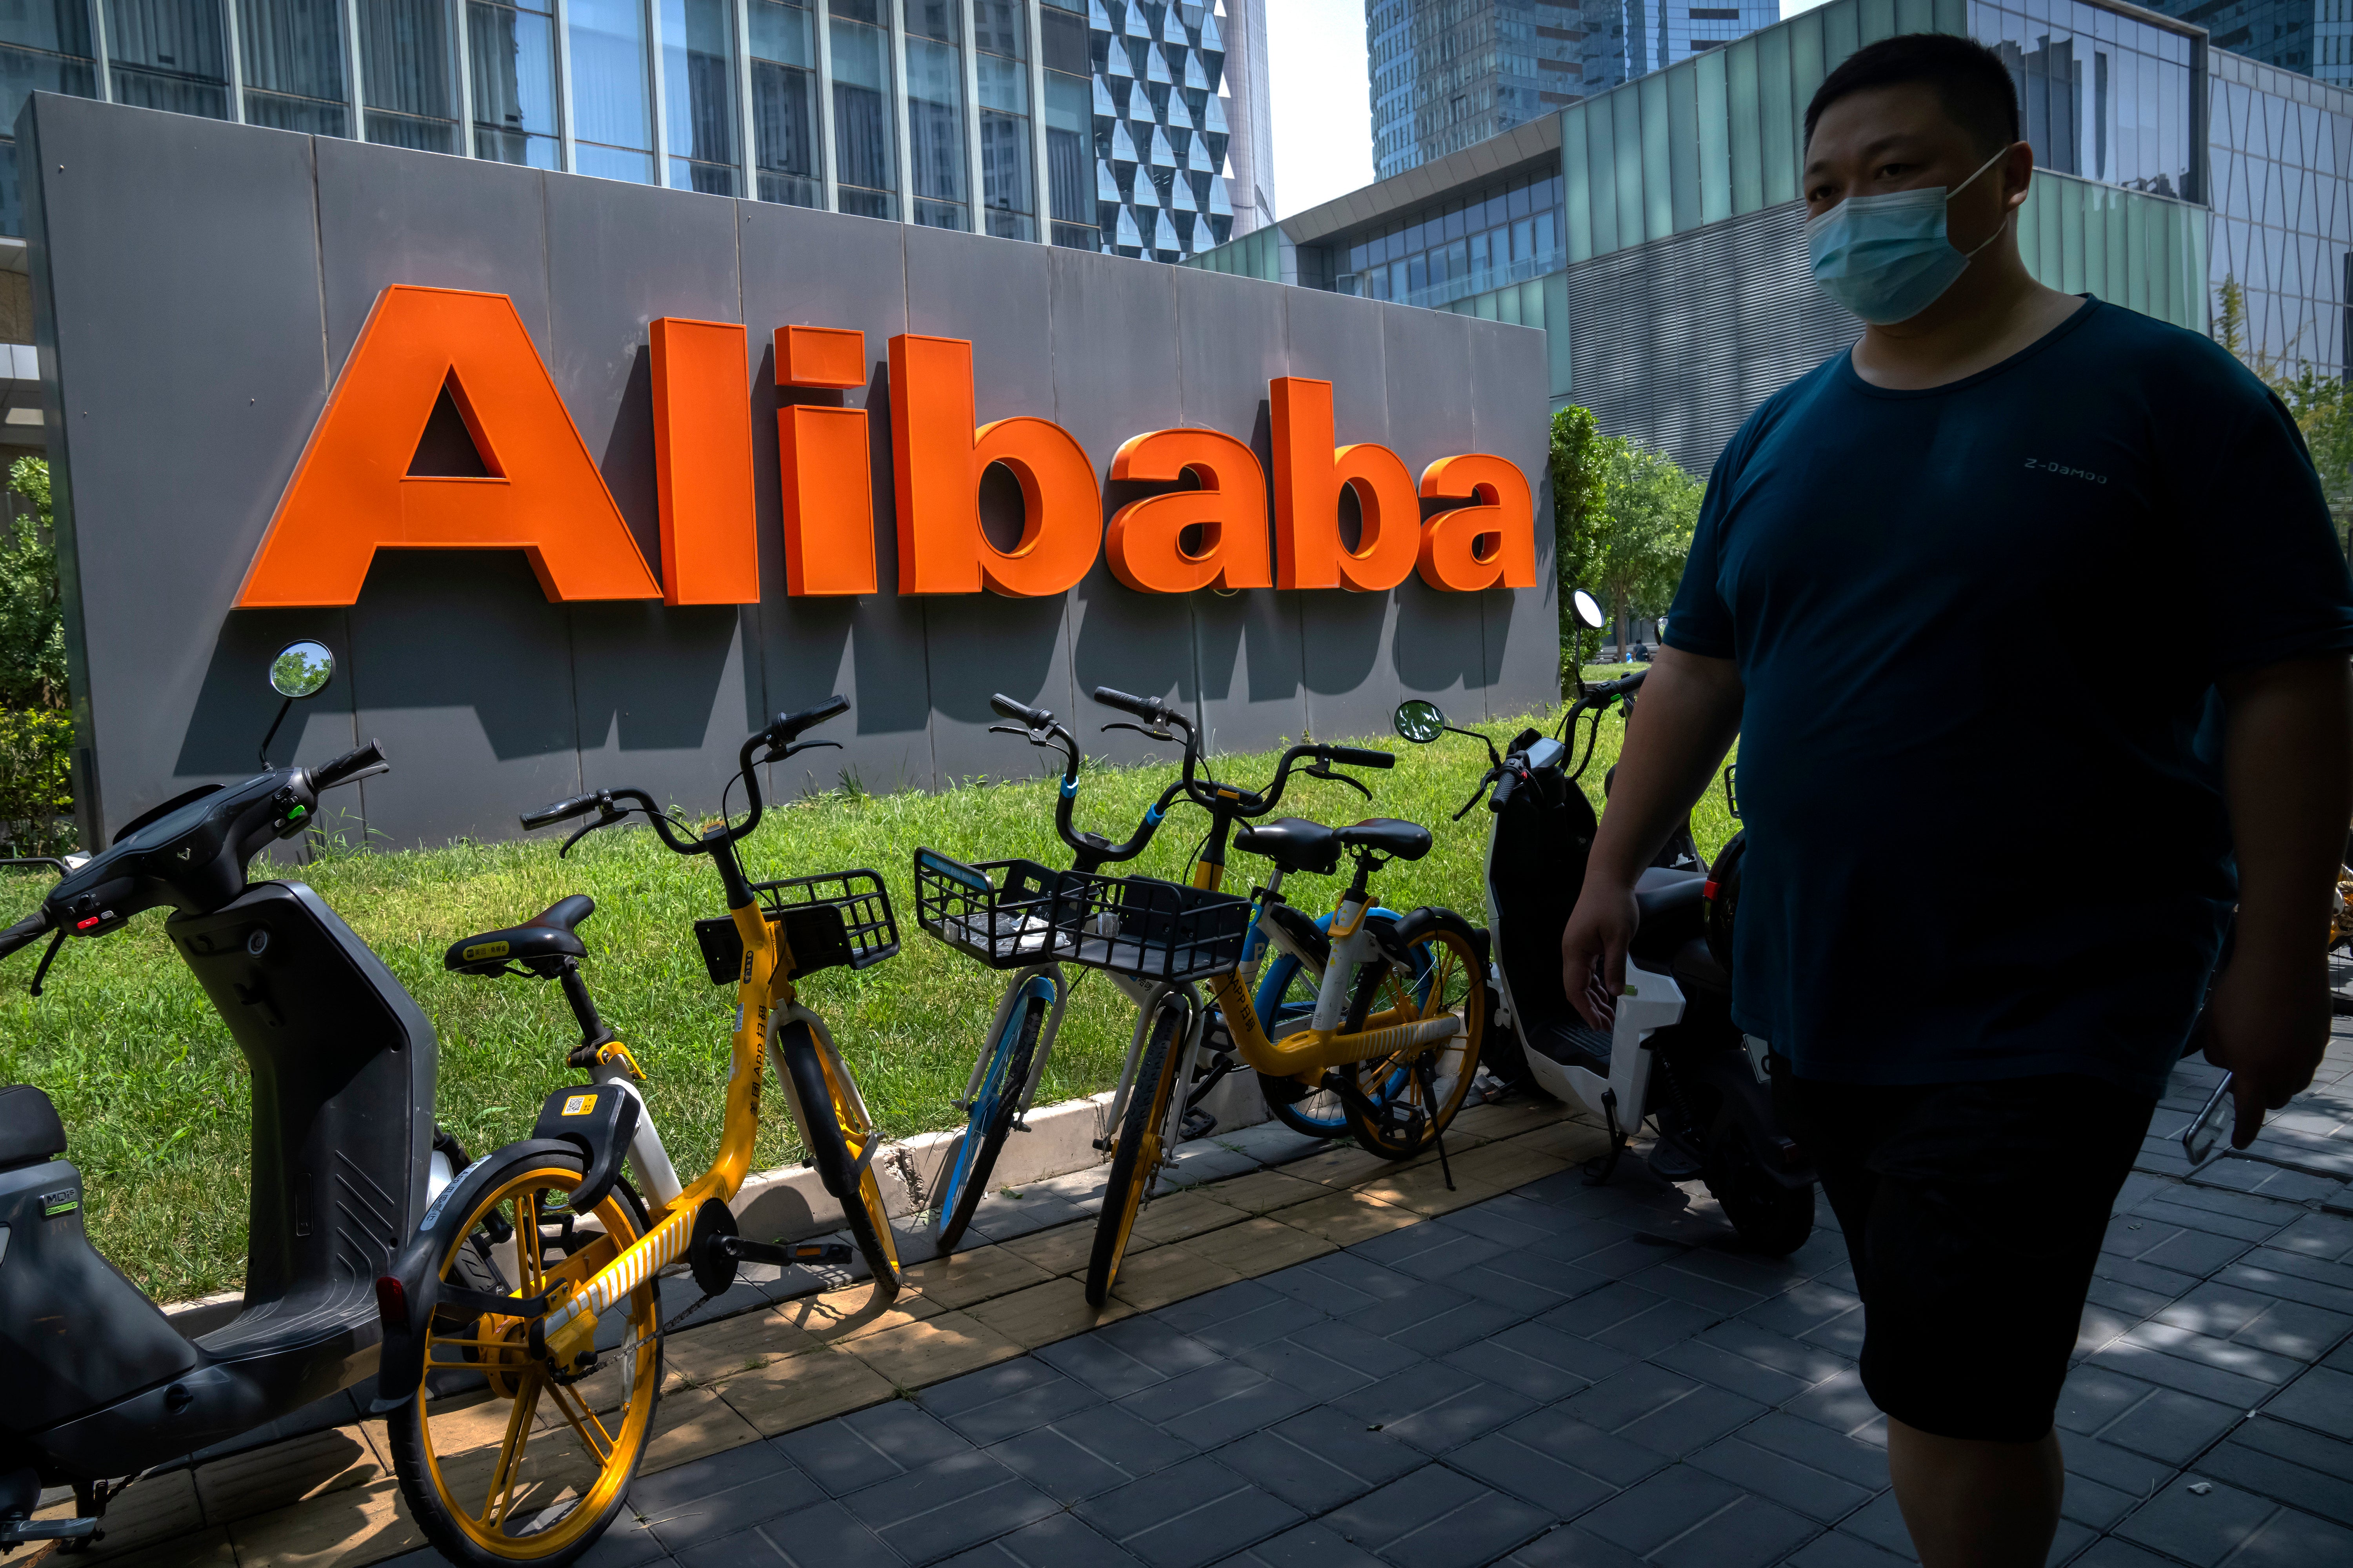 Alibaba said it will invest in 10 projects for job creation, “care for vulnerable groups” and technology innovation